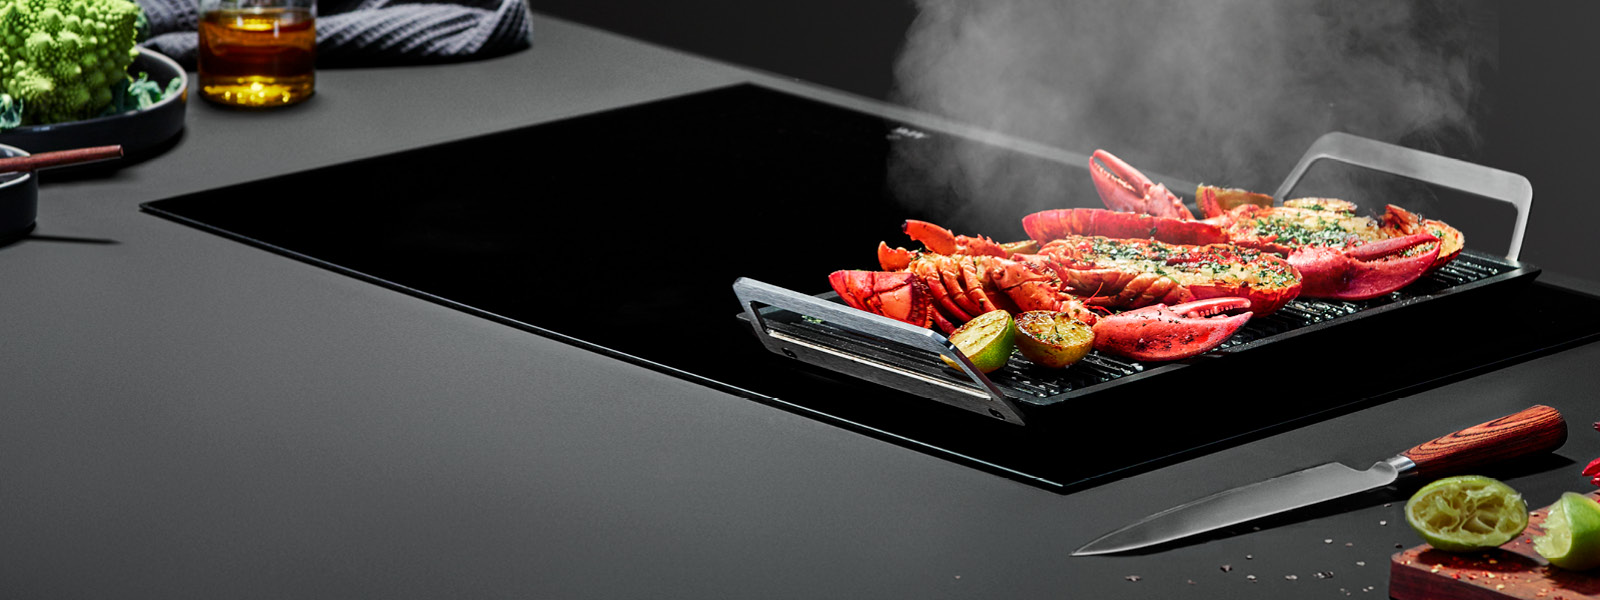 Receive A Bonus AEG Plancha Grill Valued At $529* With The Purchase Of An Eligible AEG Induction Cooktop at Hart & Co